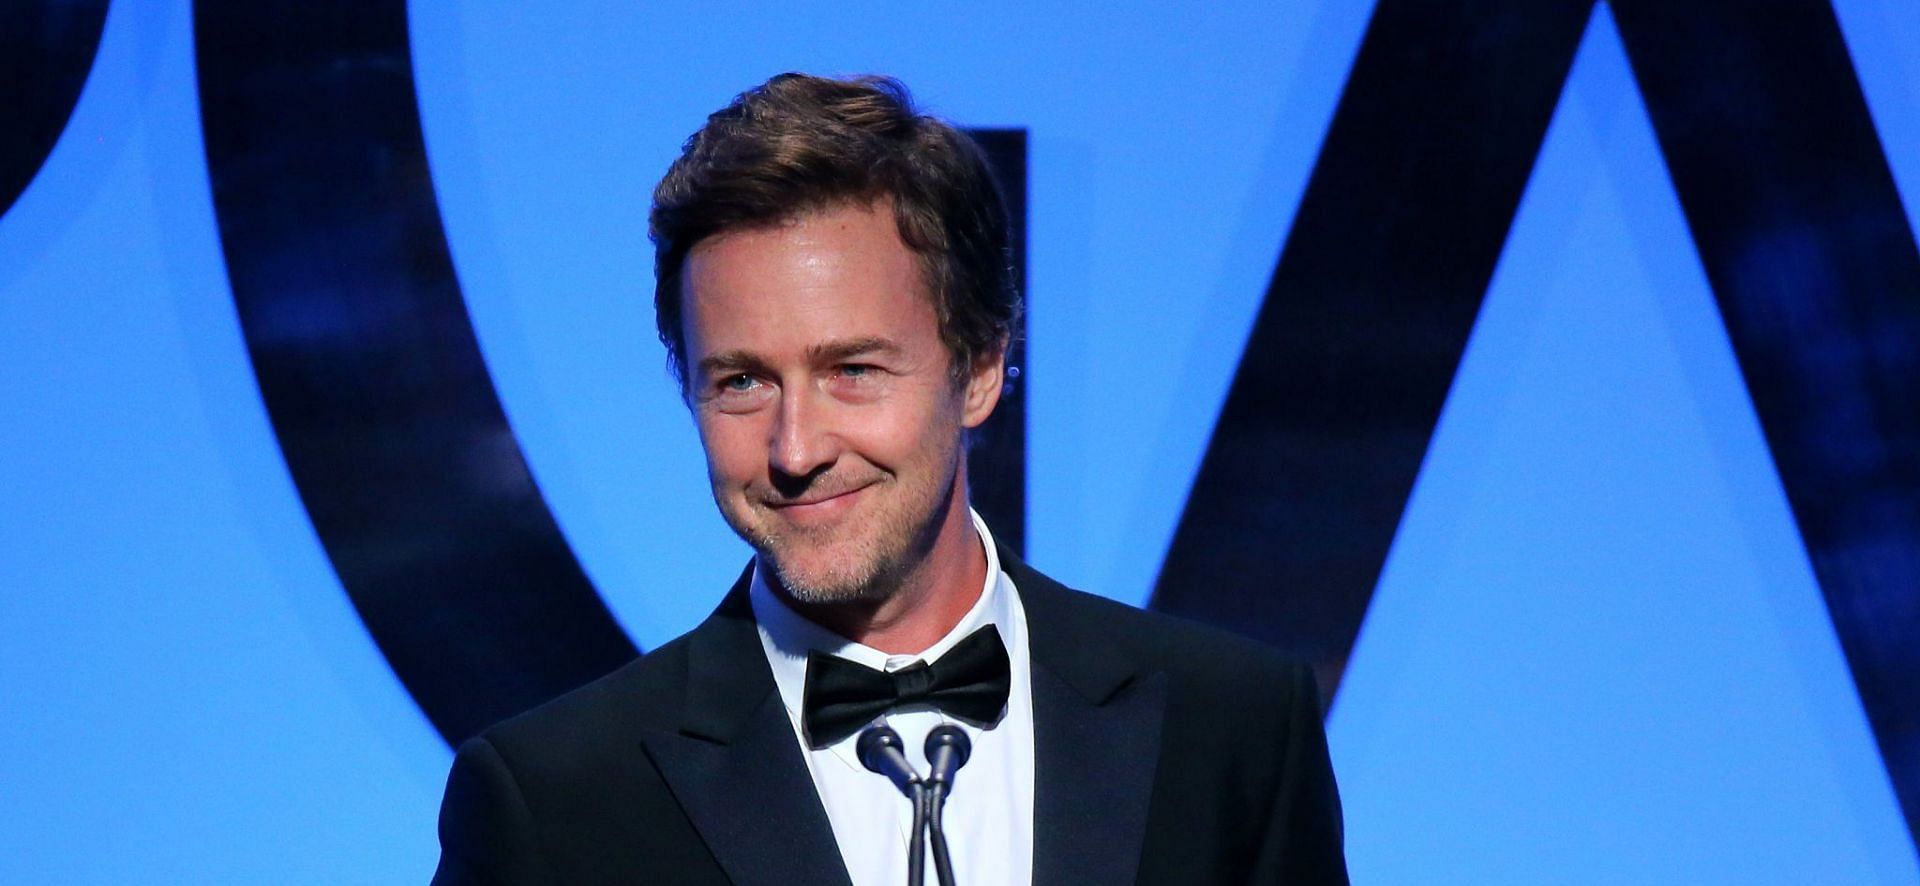 Edward Norton says he feels &quot;uncomfortable&quot; with his family history about slavery (Image via Getty Images)